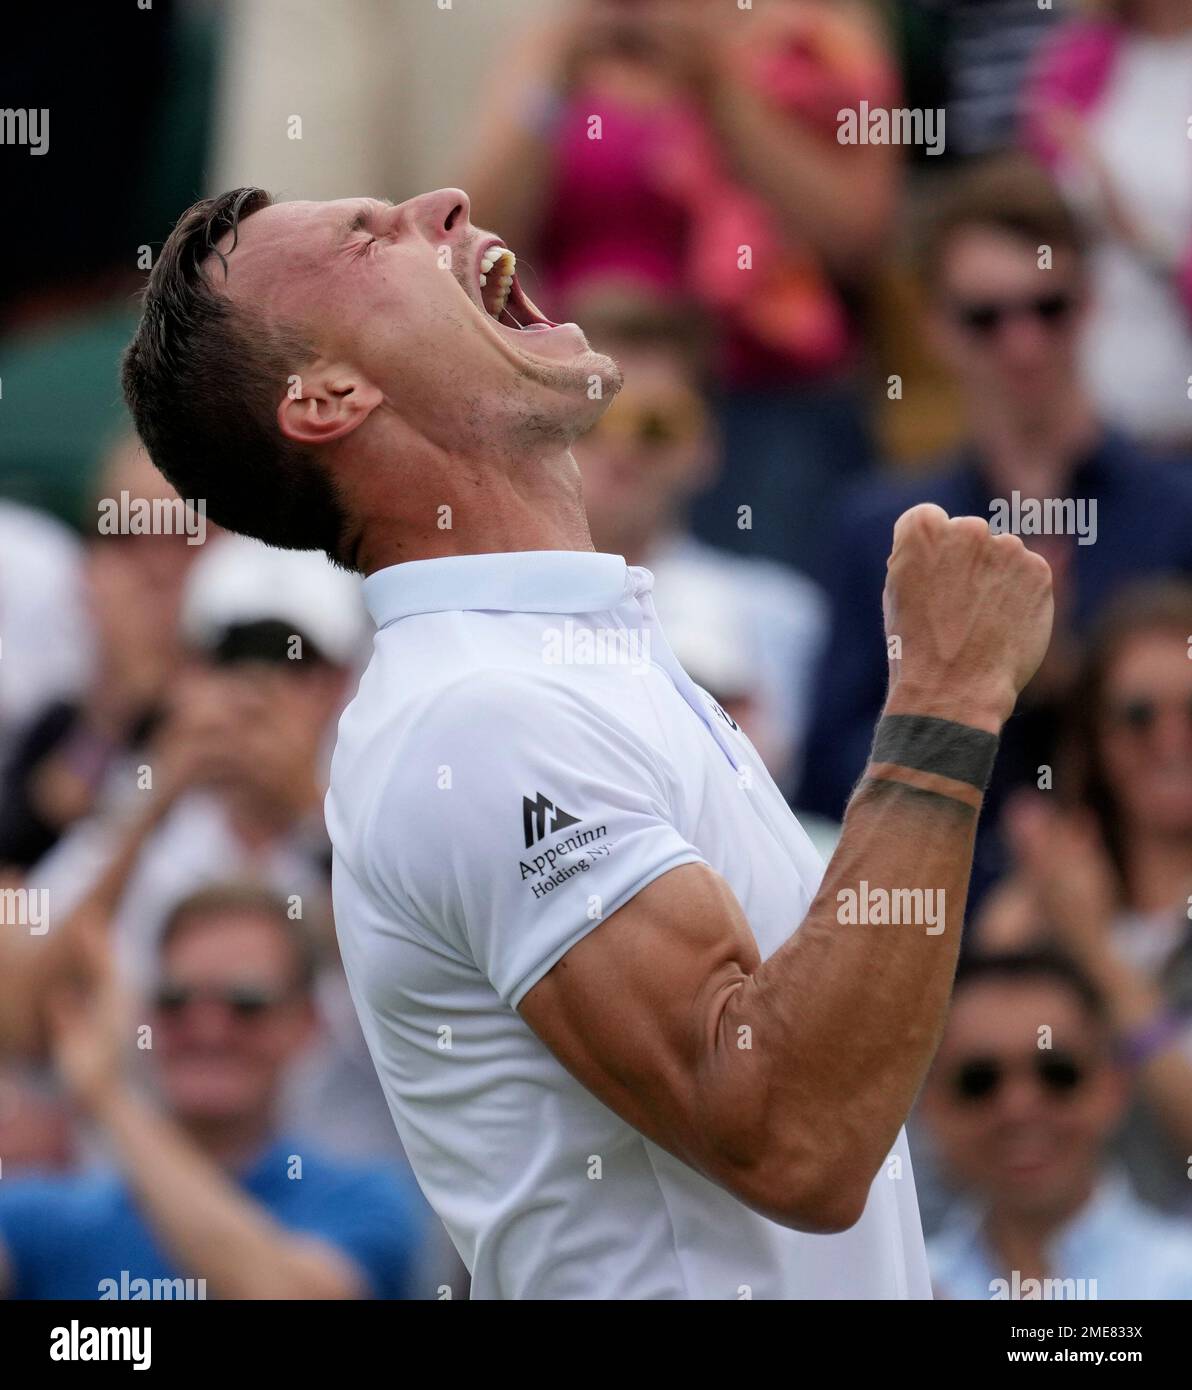 Hungarys Marton Fucsovics celebrates after defeating Russias Andrey Rublev during the mens singles fourth round match on day seven of the Wimbledon Tennis Championships in London, Monday, July 5, 2021